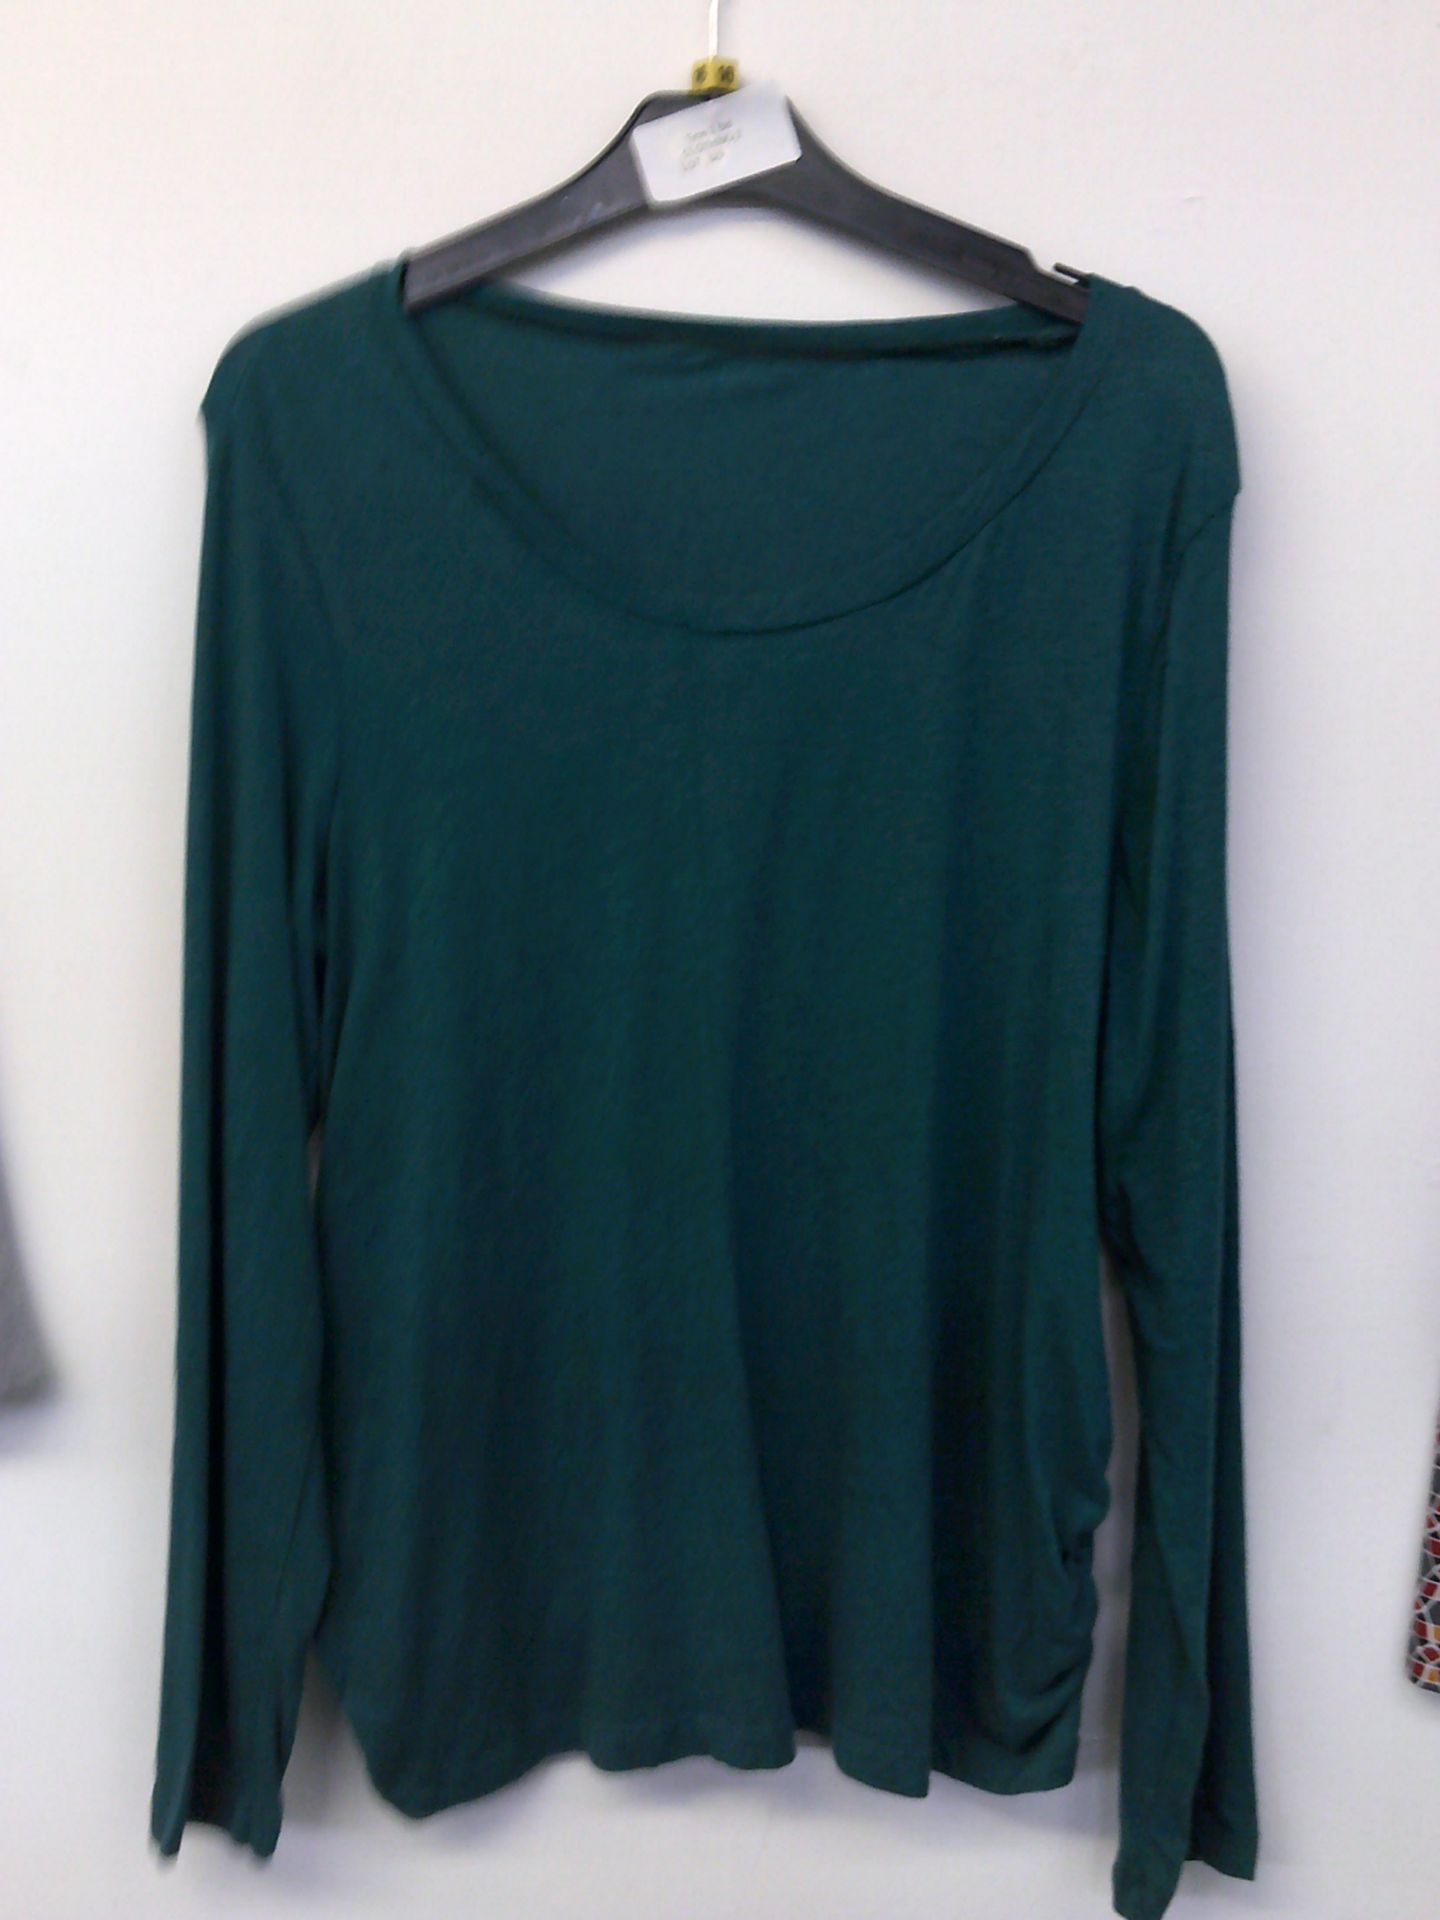 MARKS AND SPENCERS LONG SLEEVE TOP SIZE 16